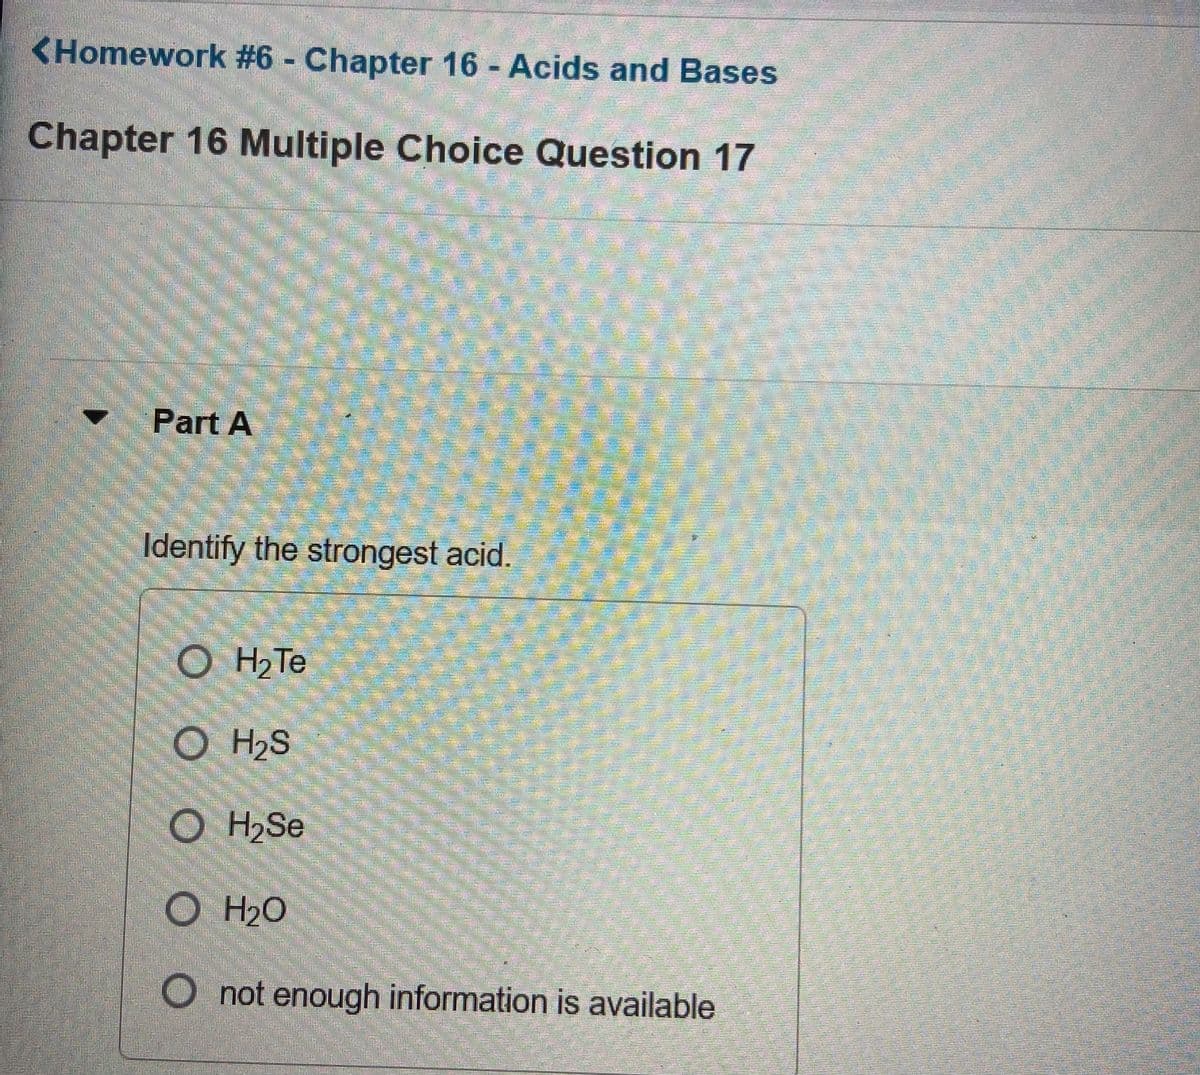 <Homework #6 Chapter 16 Acids and Bases
Chapter 16 Multiple Choice Question 17
ॐ
Part A
Identify the strongest acid.
H2 Te
O H2S
O H,Se
H2O
O not enough information is available
